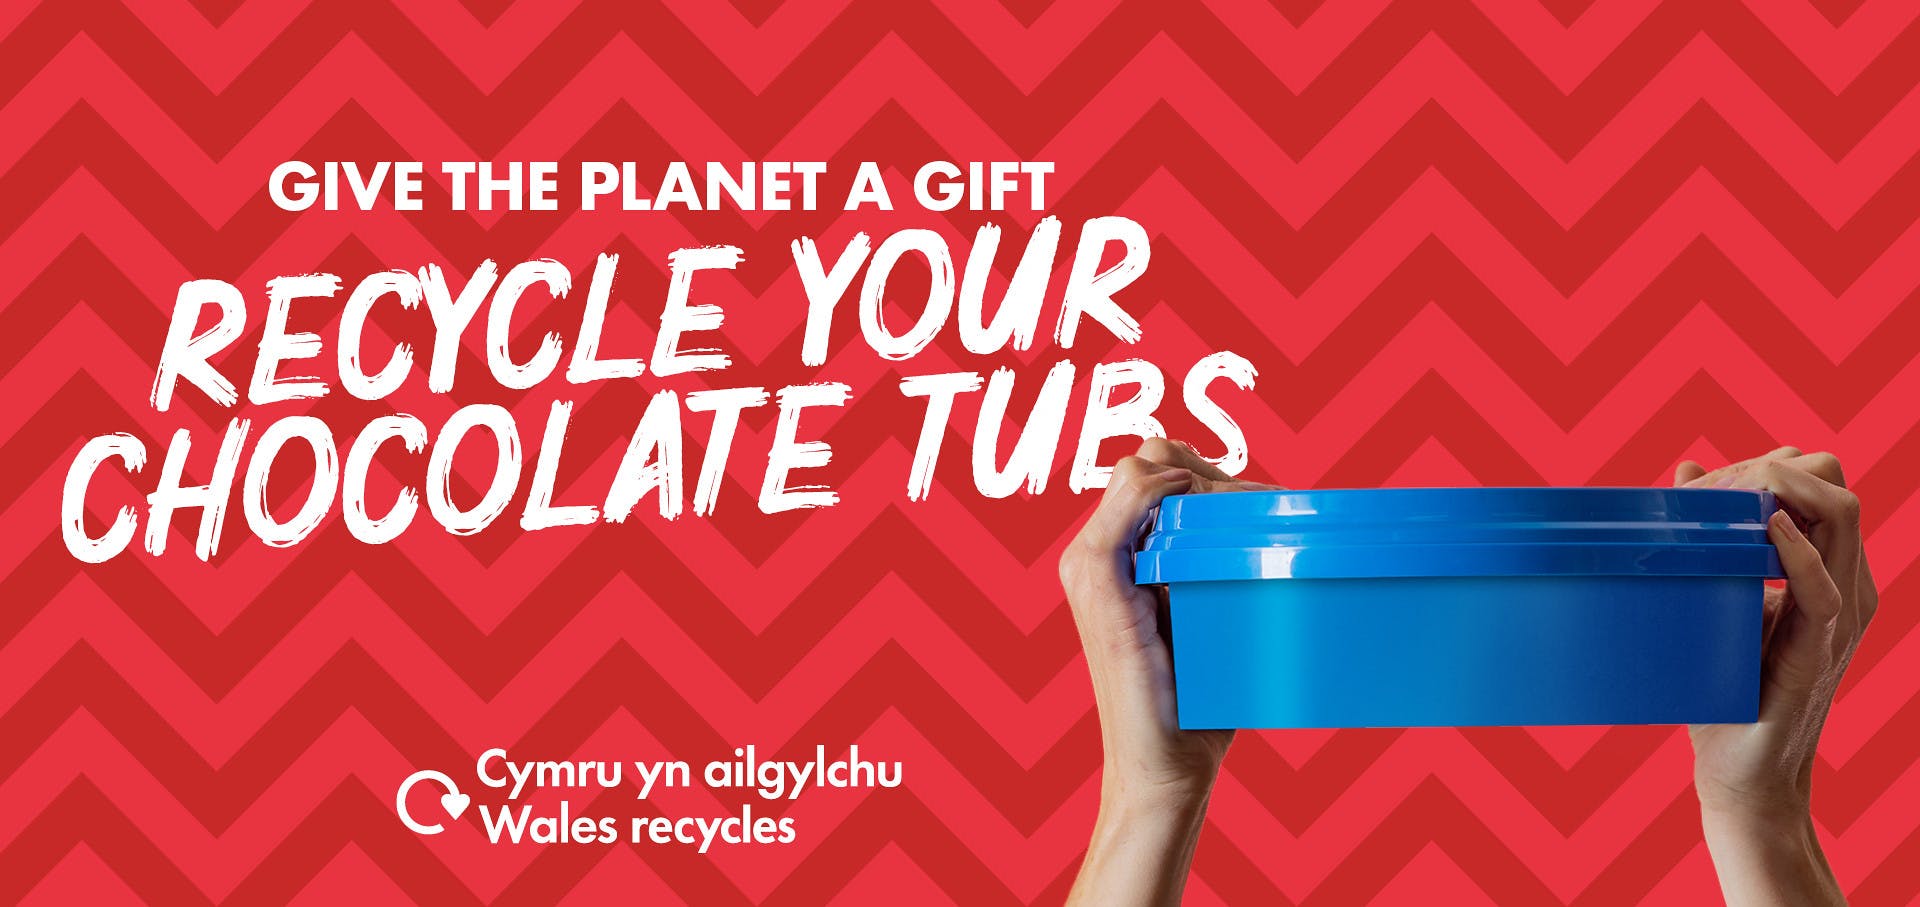 Give the planet a gift, recycle your chocolate tubs